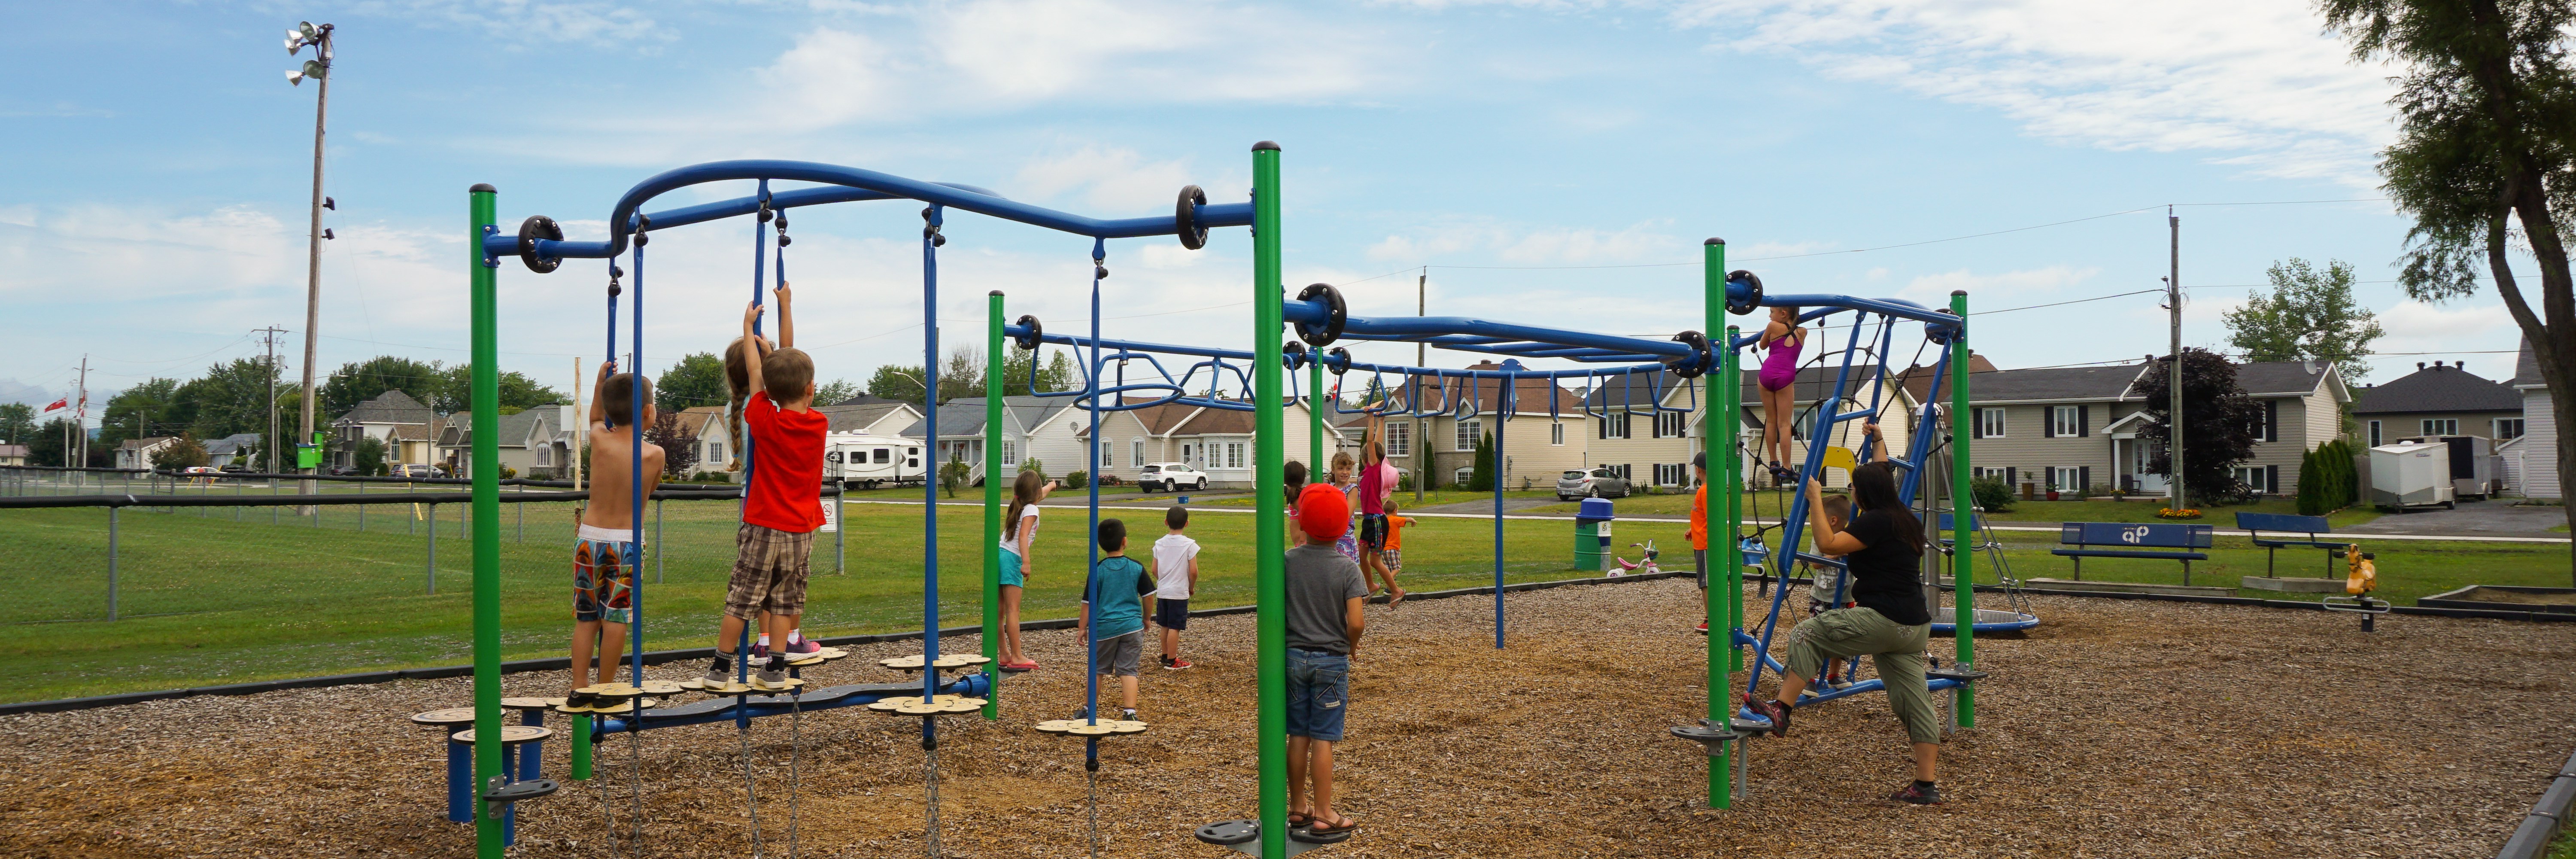 kids playing in a play structure 